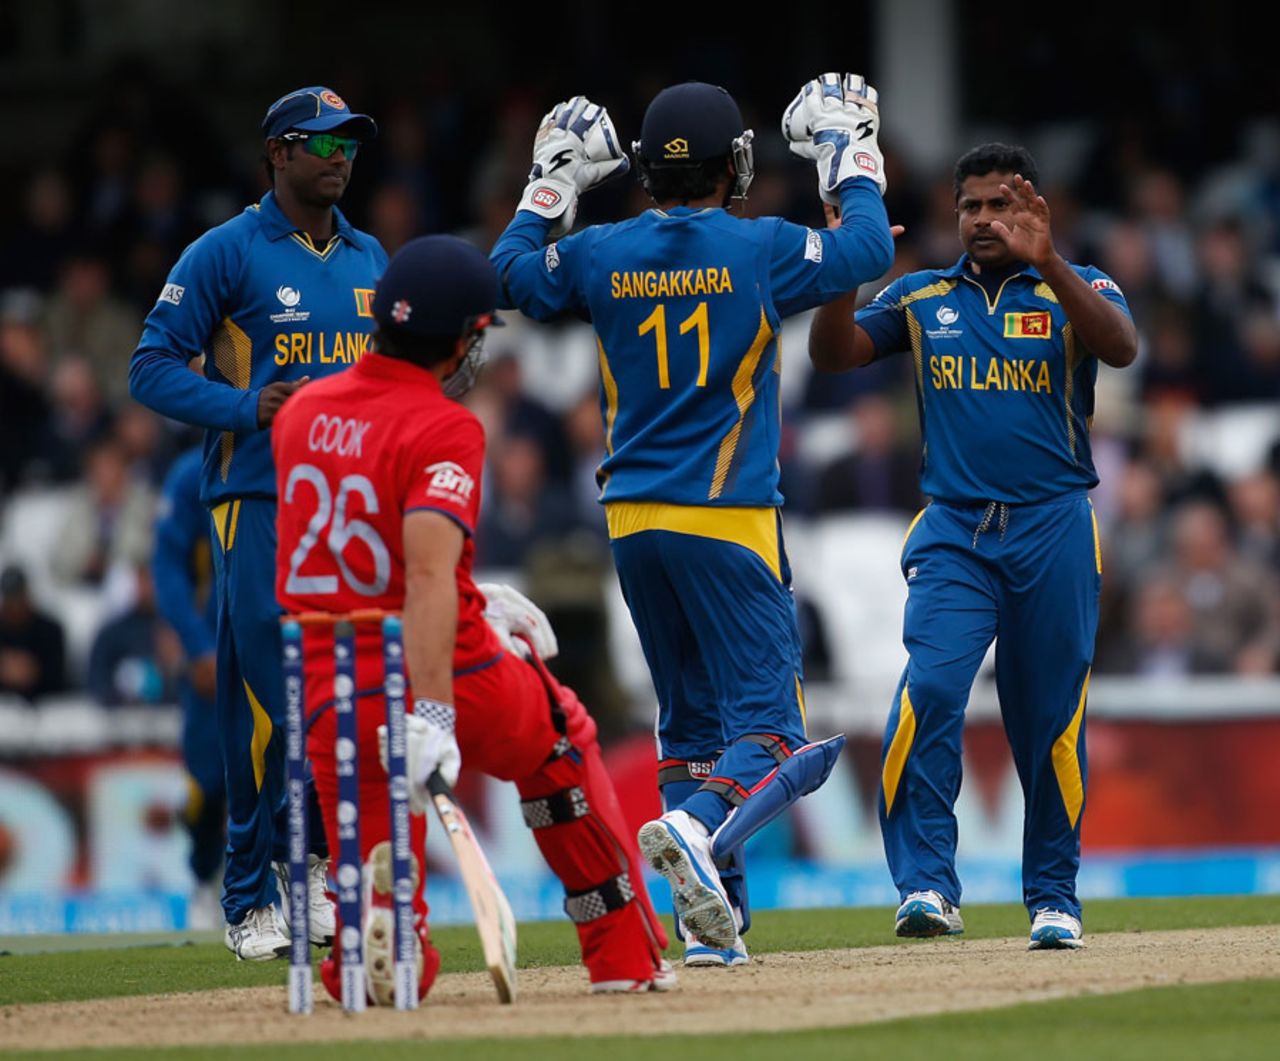 Rangana Herath and Kumar Sangakkara celebrate after the umpire rules Alastair Cook out, England v Sri Lanka, Champions Trophy, Group A, The Oval, June 13, 2013